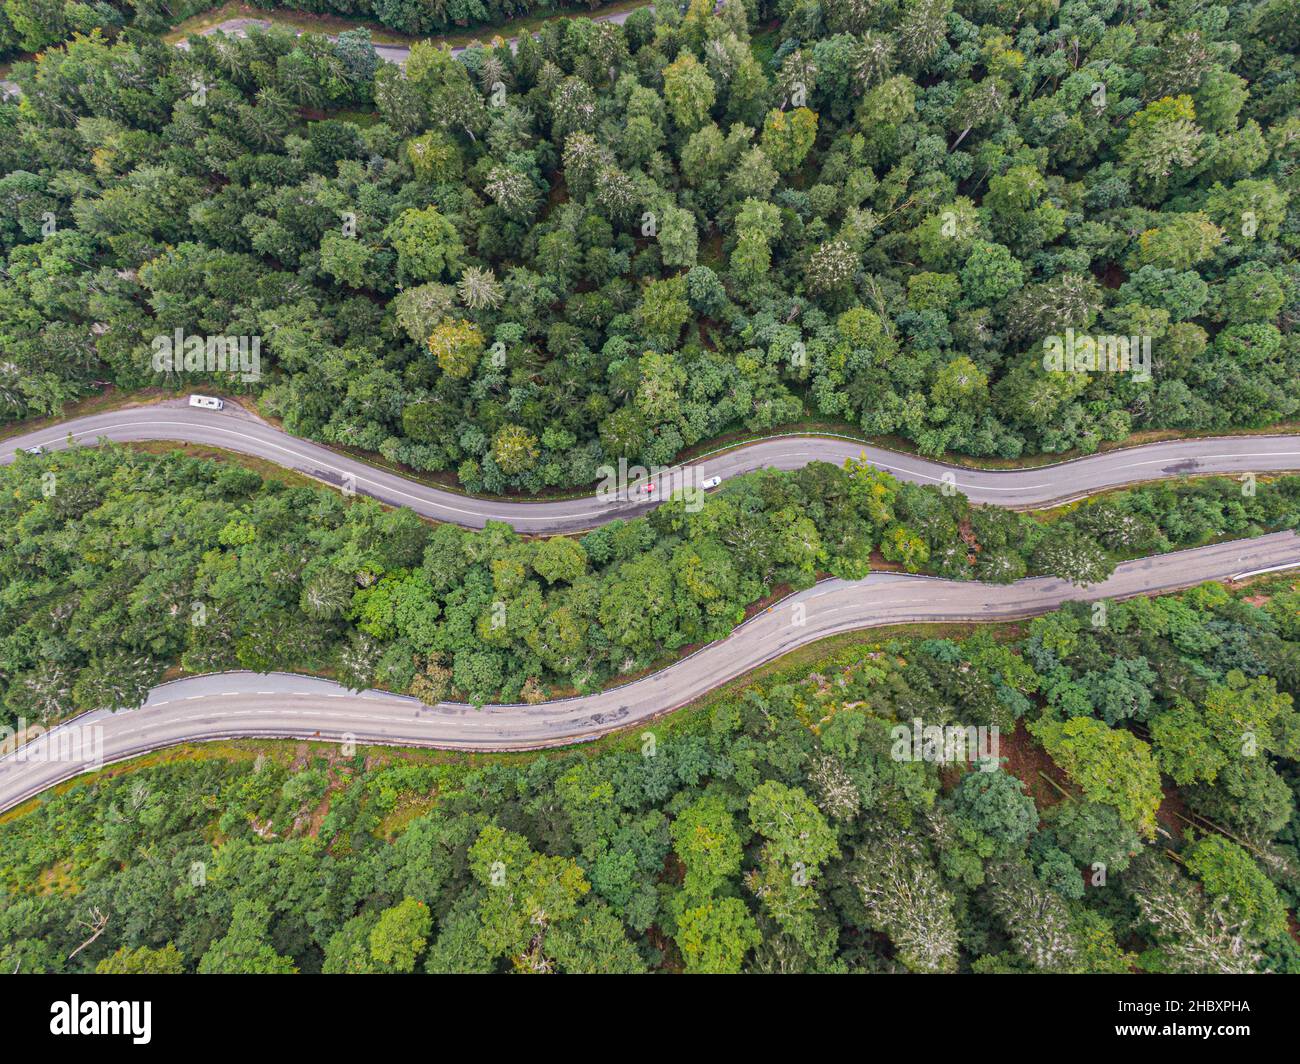 Aerial view on two roads crossing voges coniferous forest Stock Photo